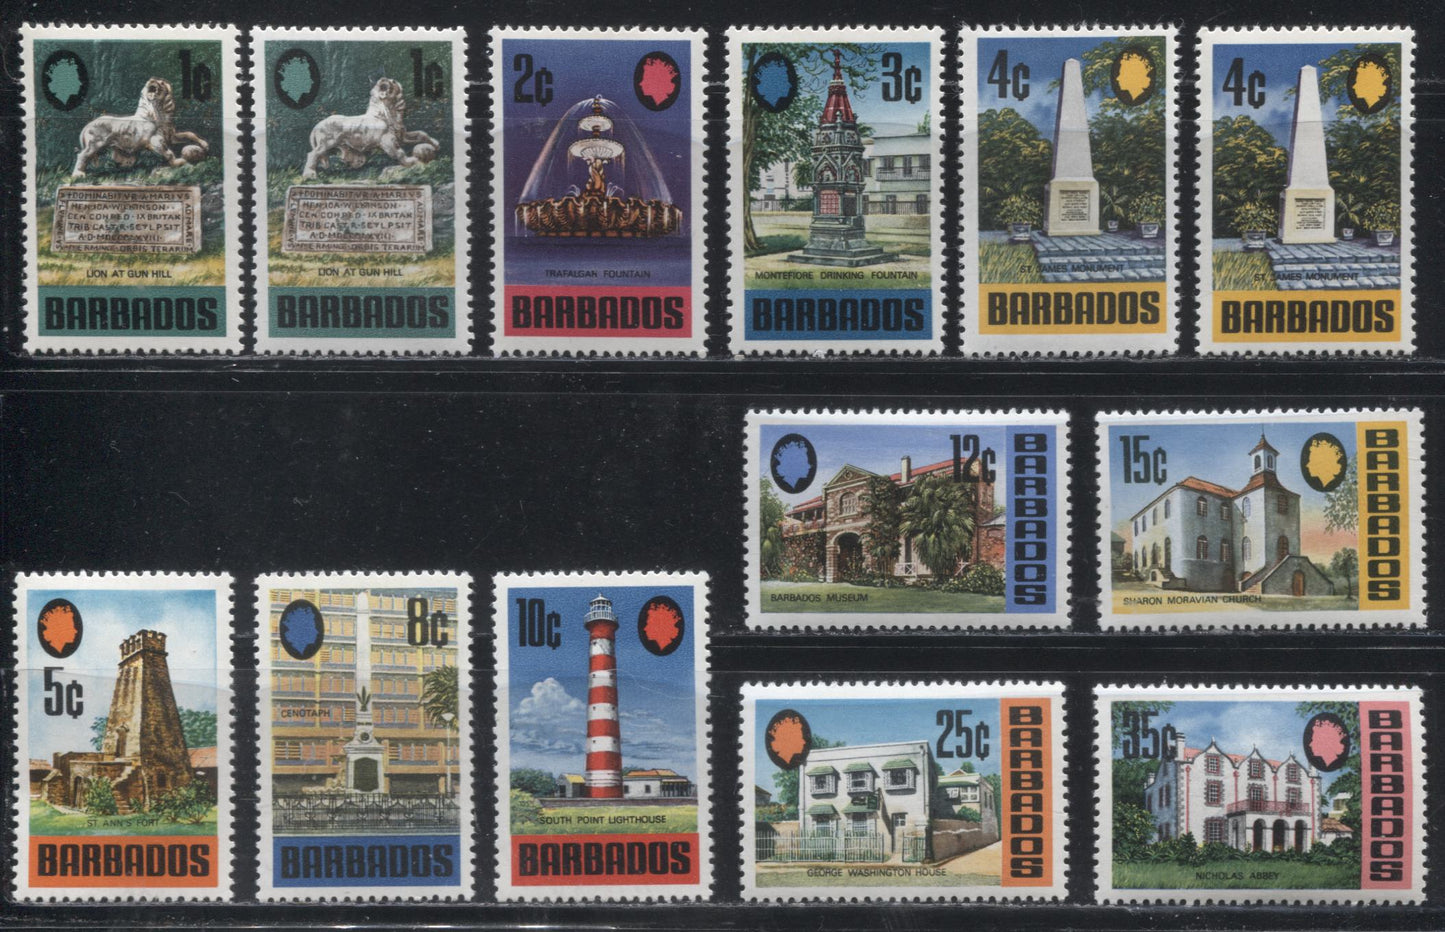 Barbados SG#399a-414a 1971 Pictorial Definitive Issue, A VFNH Complete Set  With Upright Watermark on Glazed Paper, Including Some Additional Paper Varieties